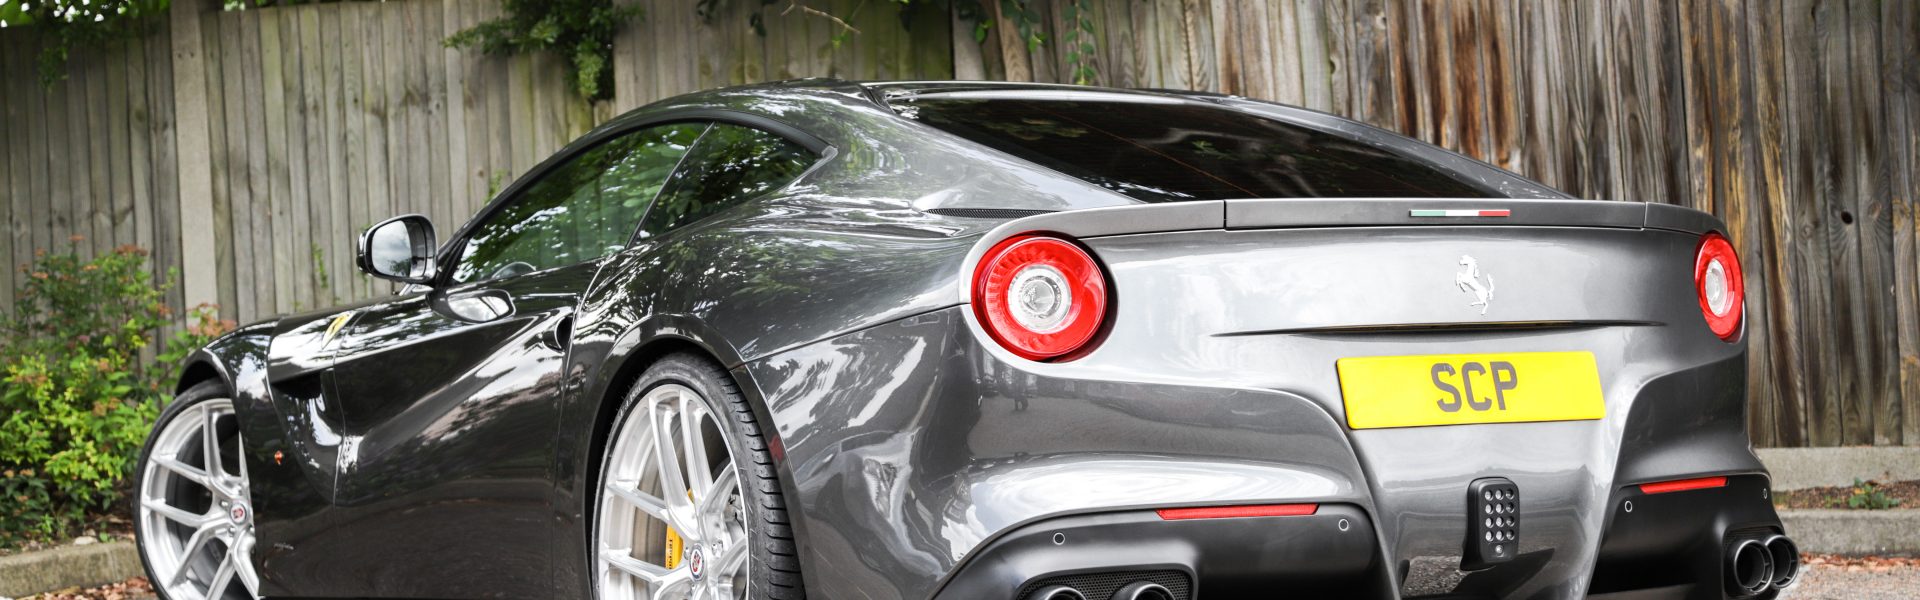 We turn the F12 up to 11 – Novitec Exhaust & Springs, HRE wheels